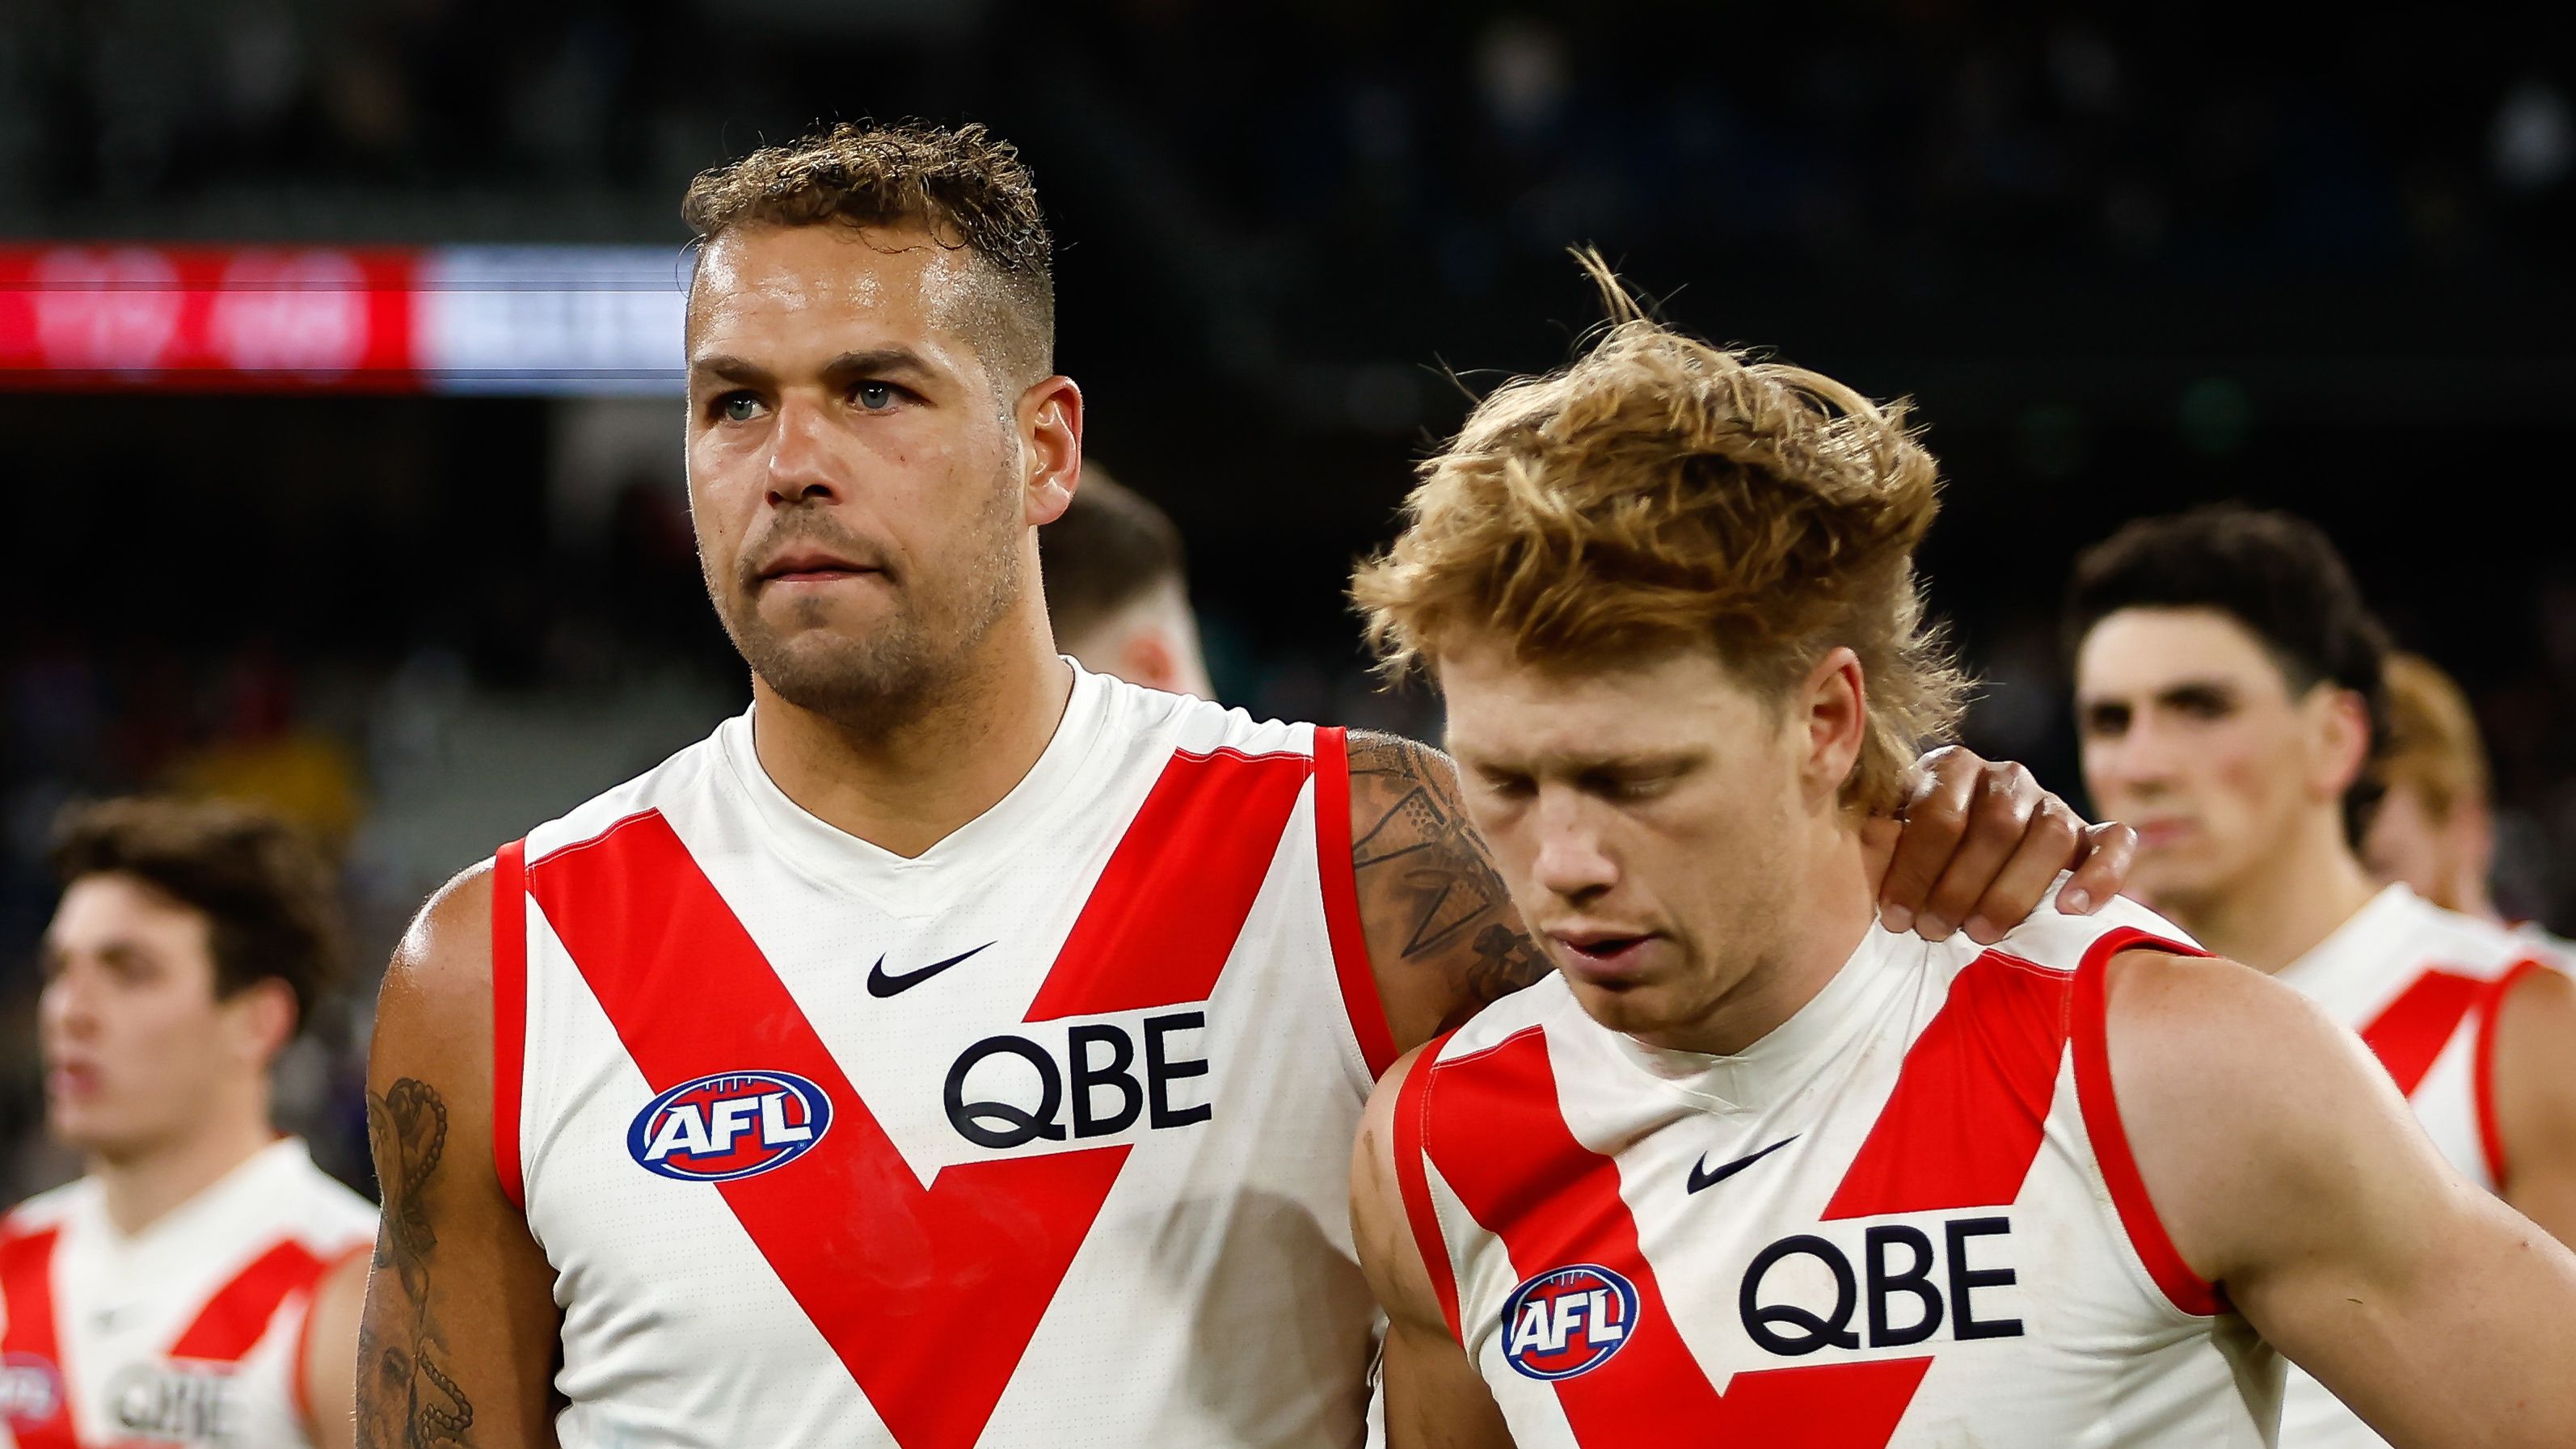 'It doesn't make sense': Swans coach baffled by Collingwood fans booing Lance Franklin